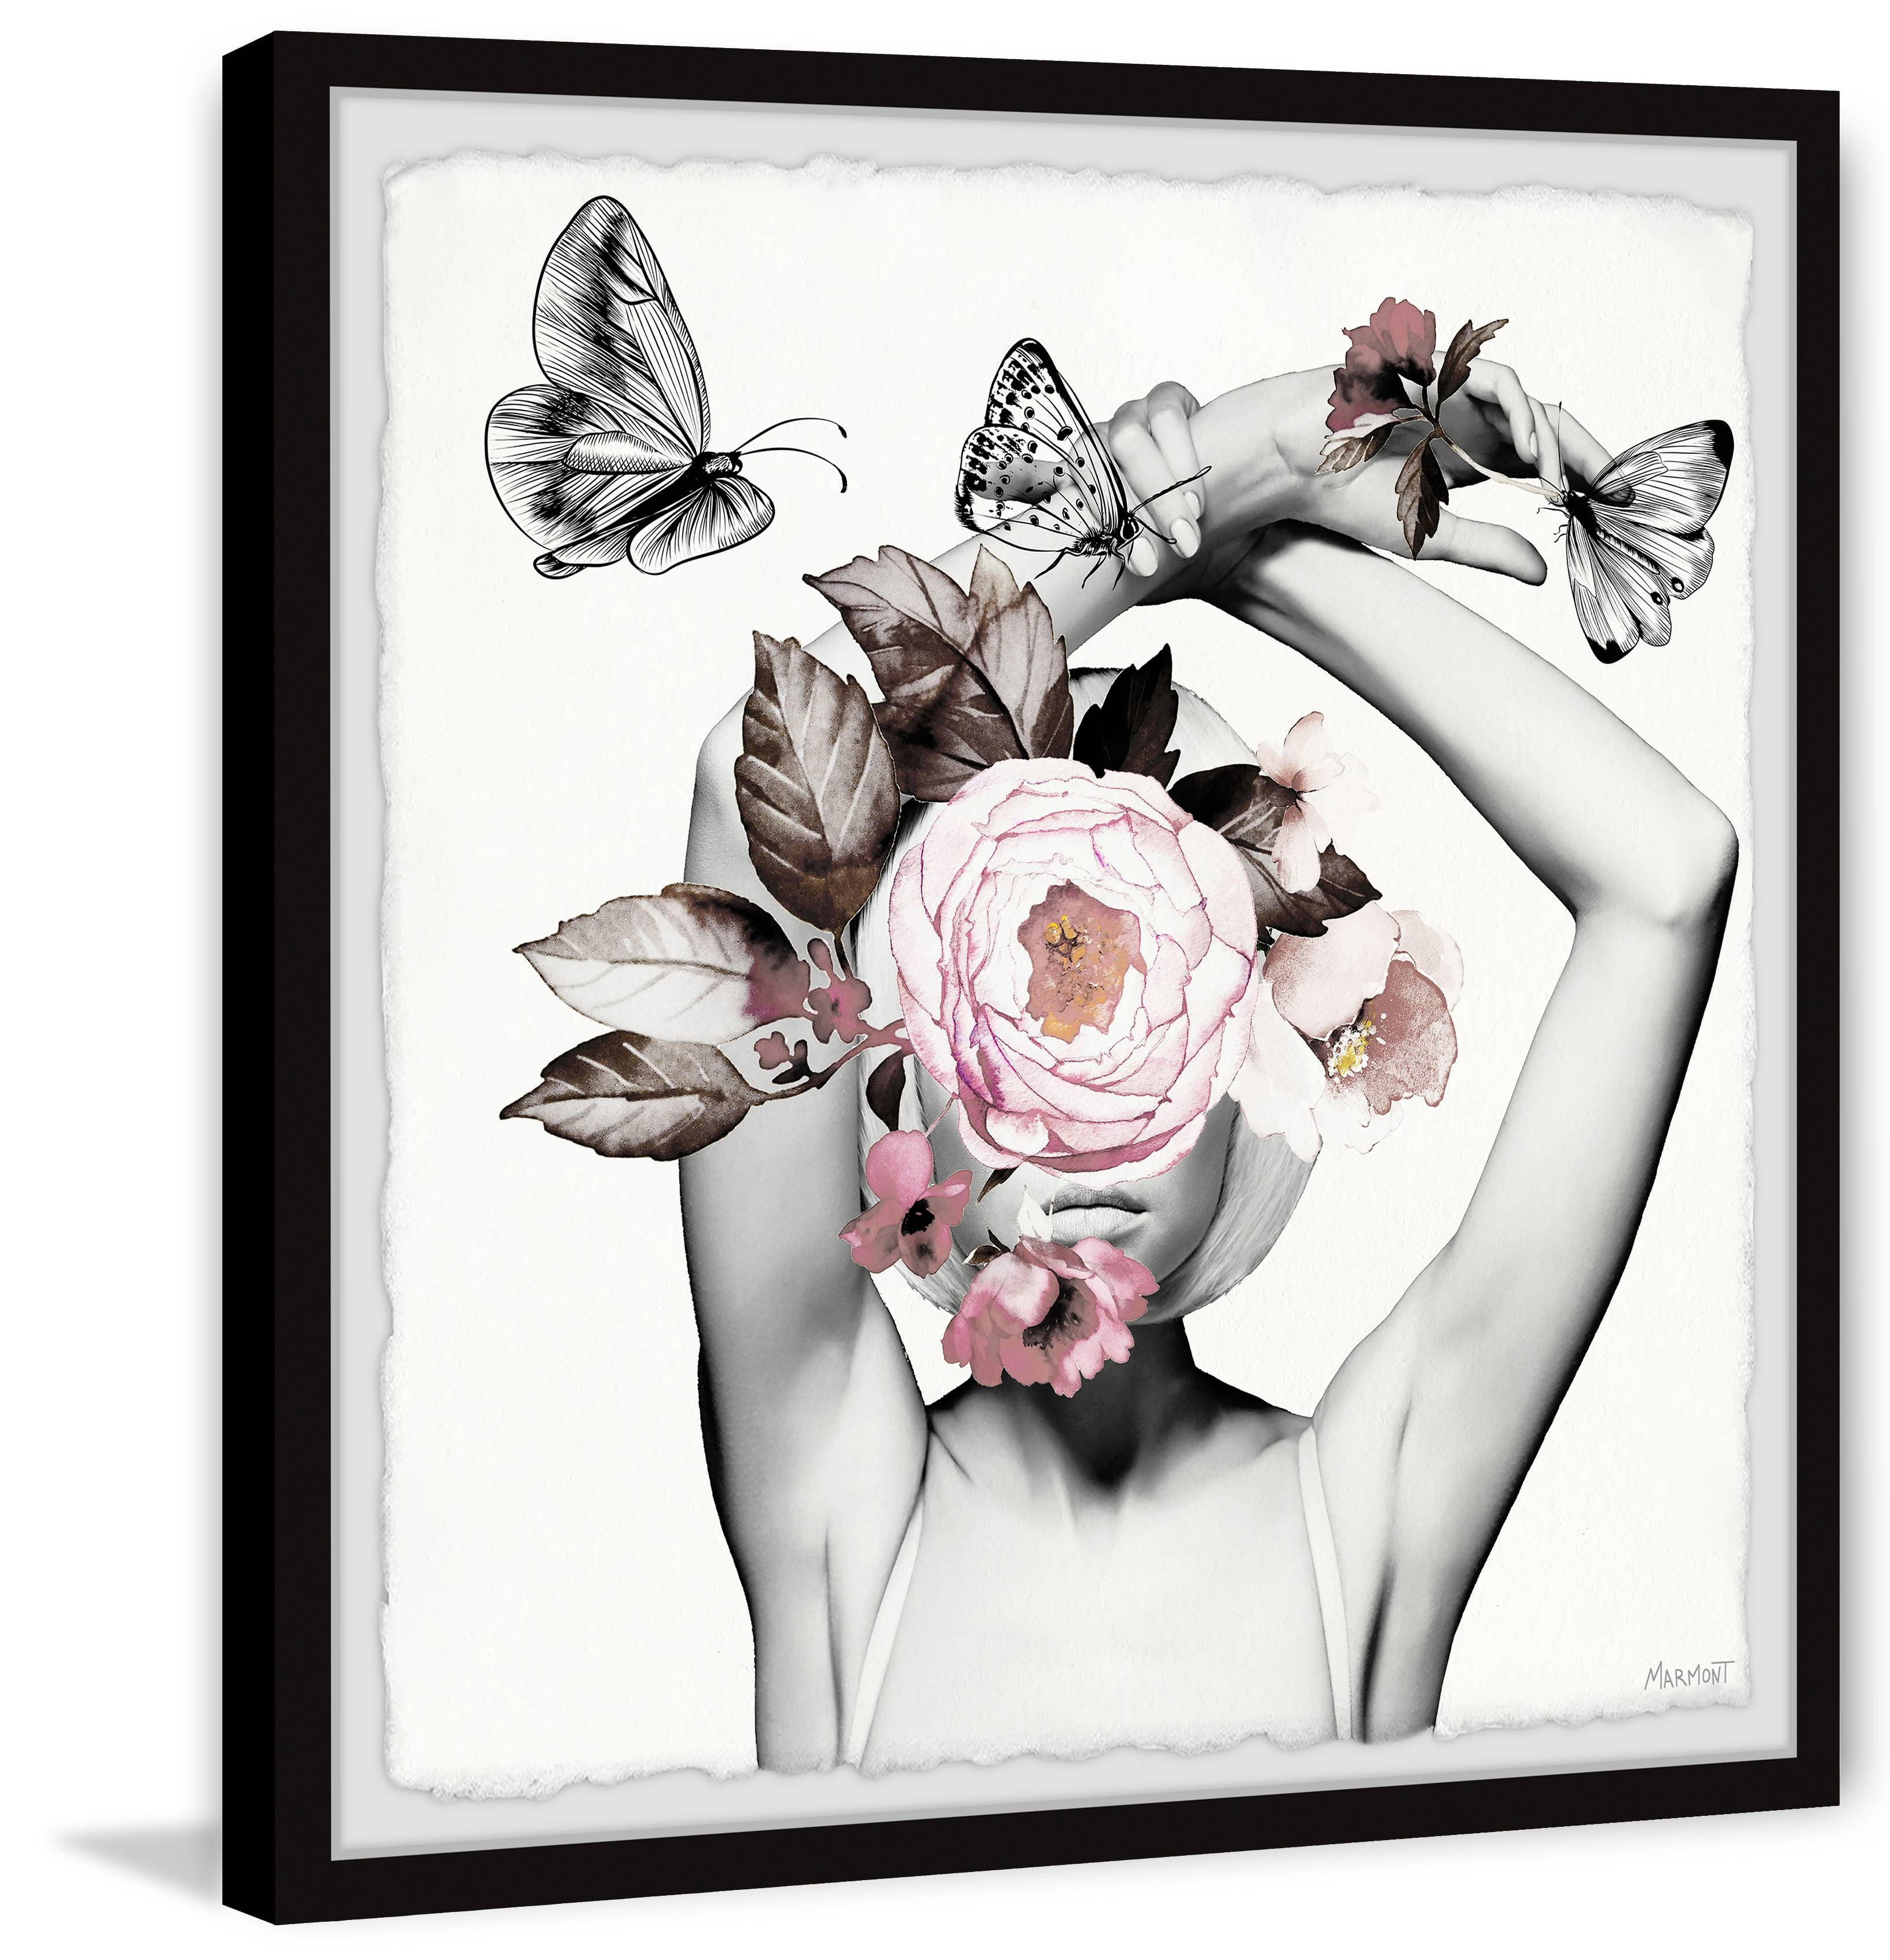 Pastel Butterfly by Marmont Hill Framed People Art Print 32 in. x 32 in.  JULTCF08WFPFL32 - The Home Depot